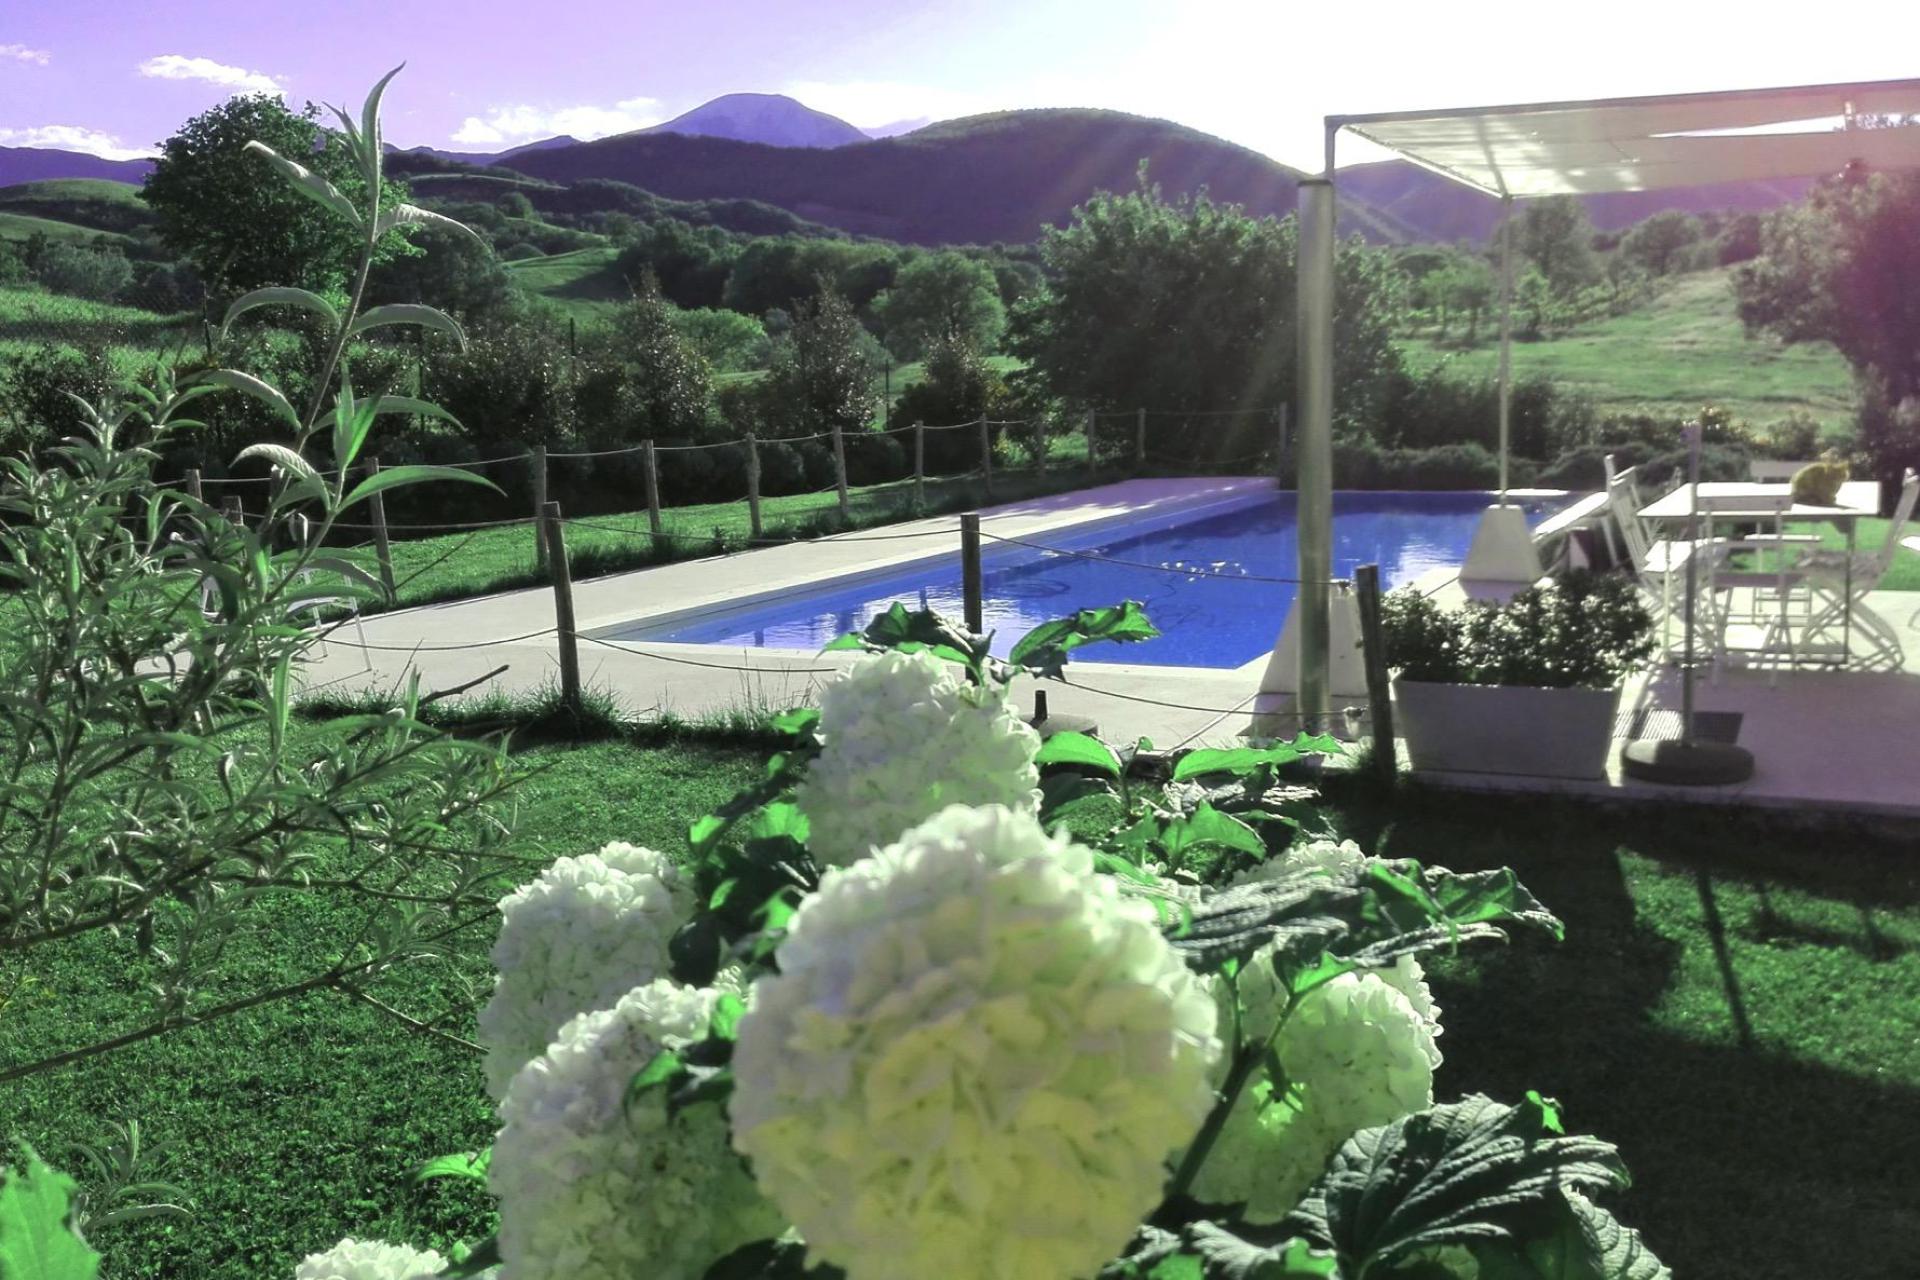 Agriturismo Marche Luxury private villa & pool between Umbria and Marche